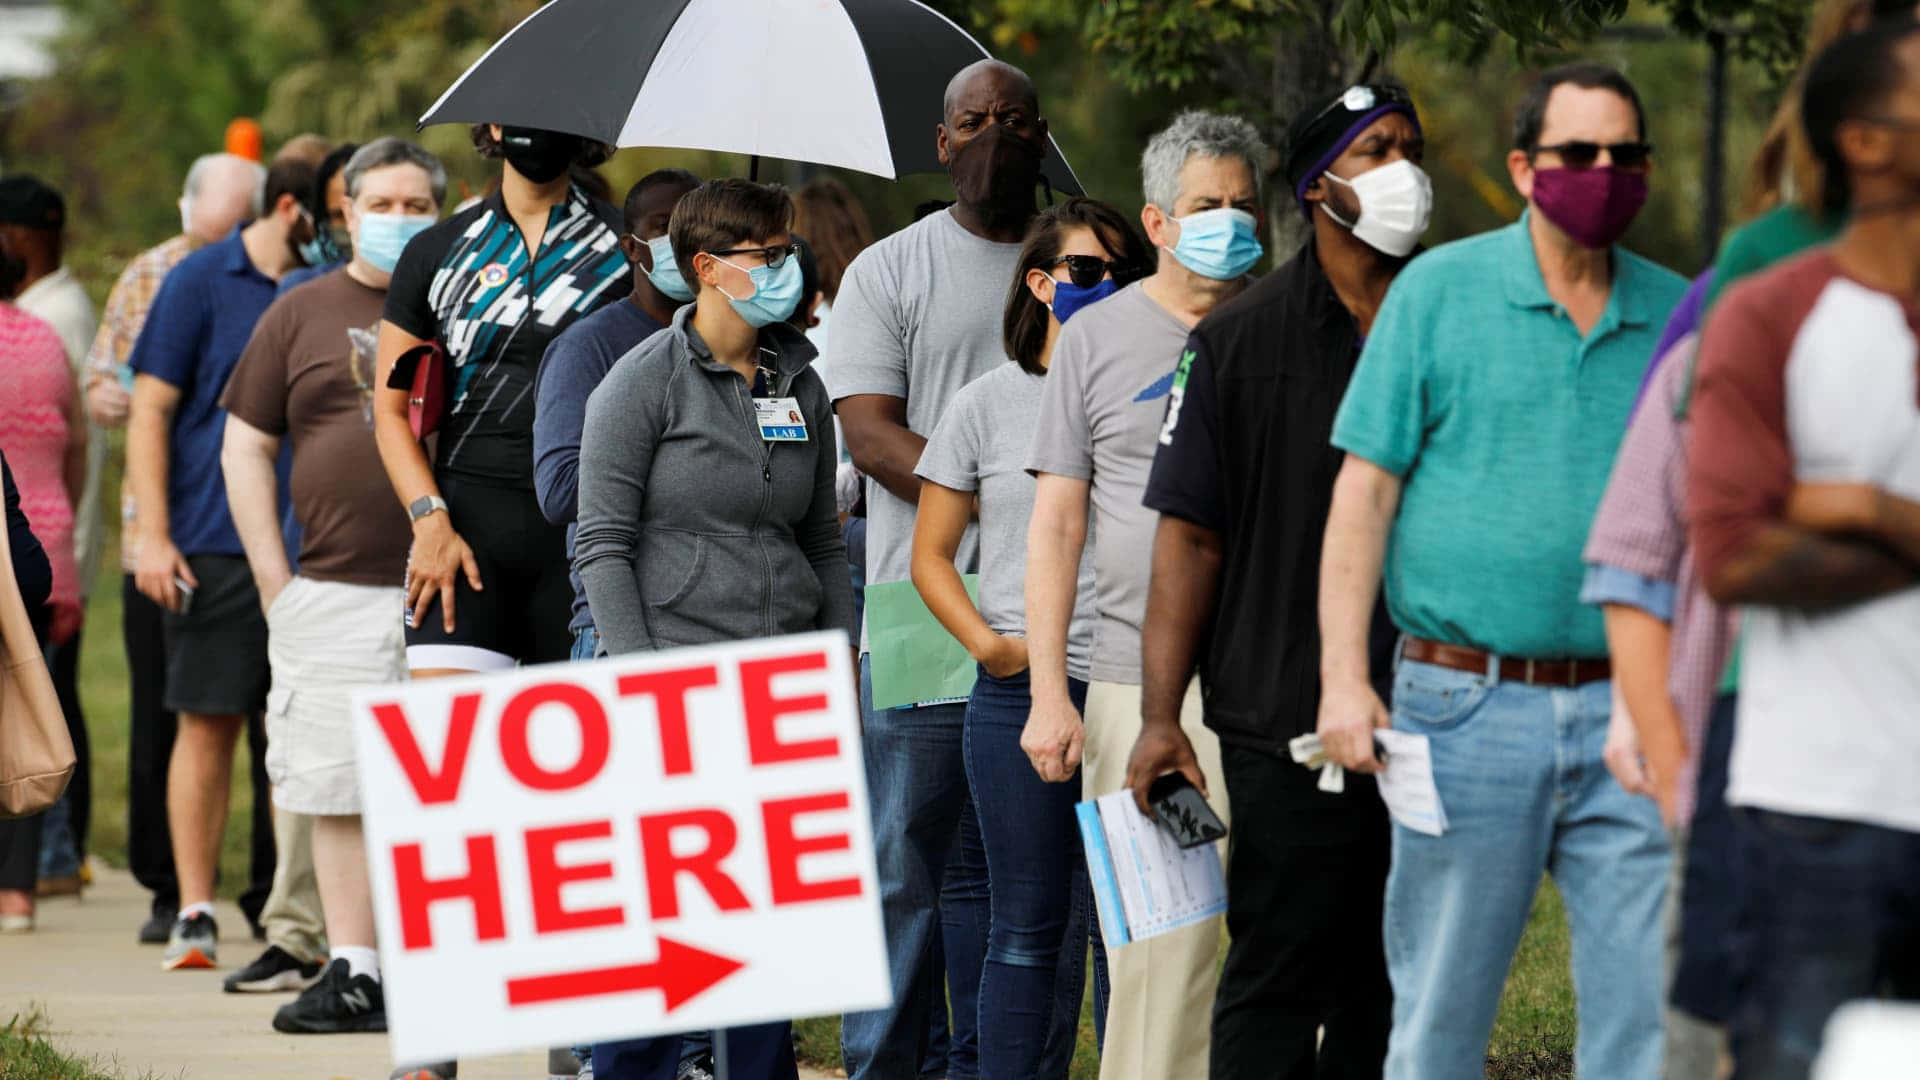 People Are Lined Up To Vote In A Polling Place